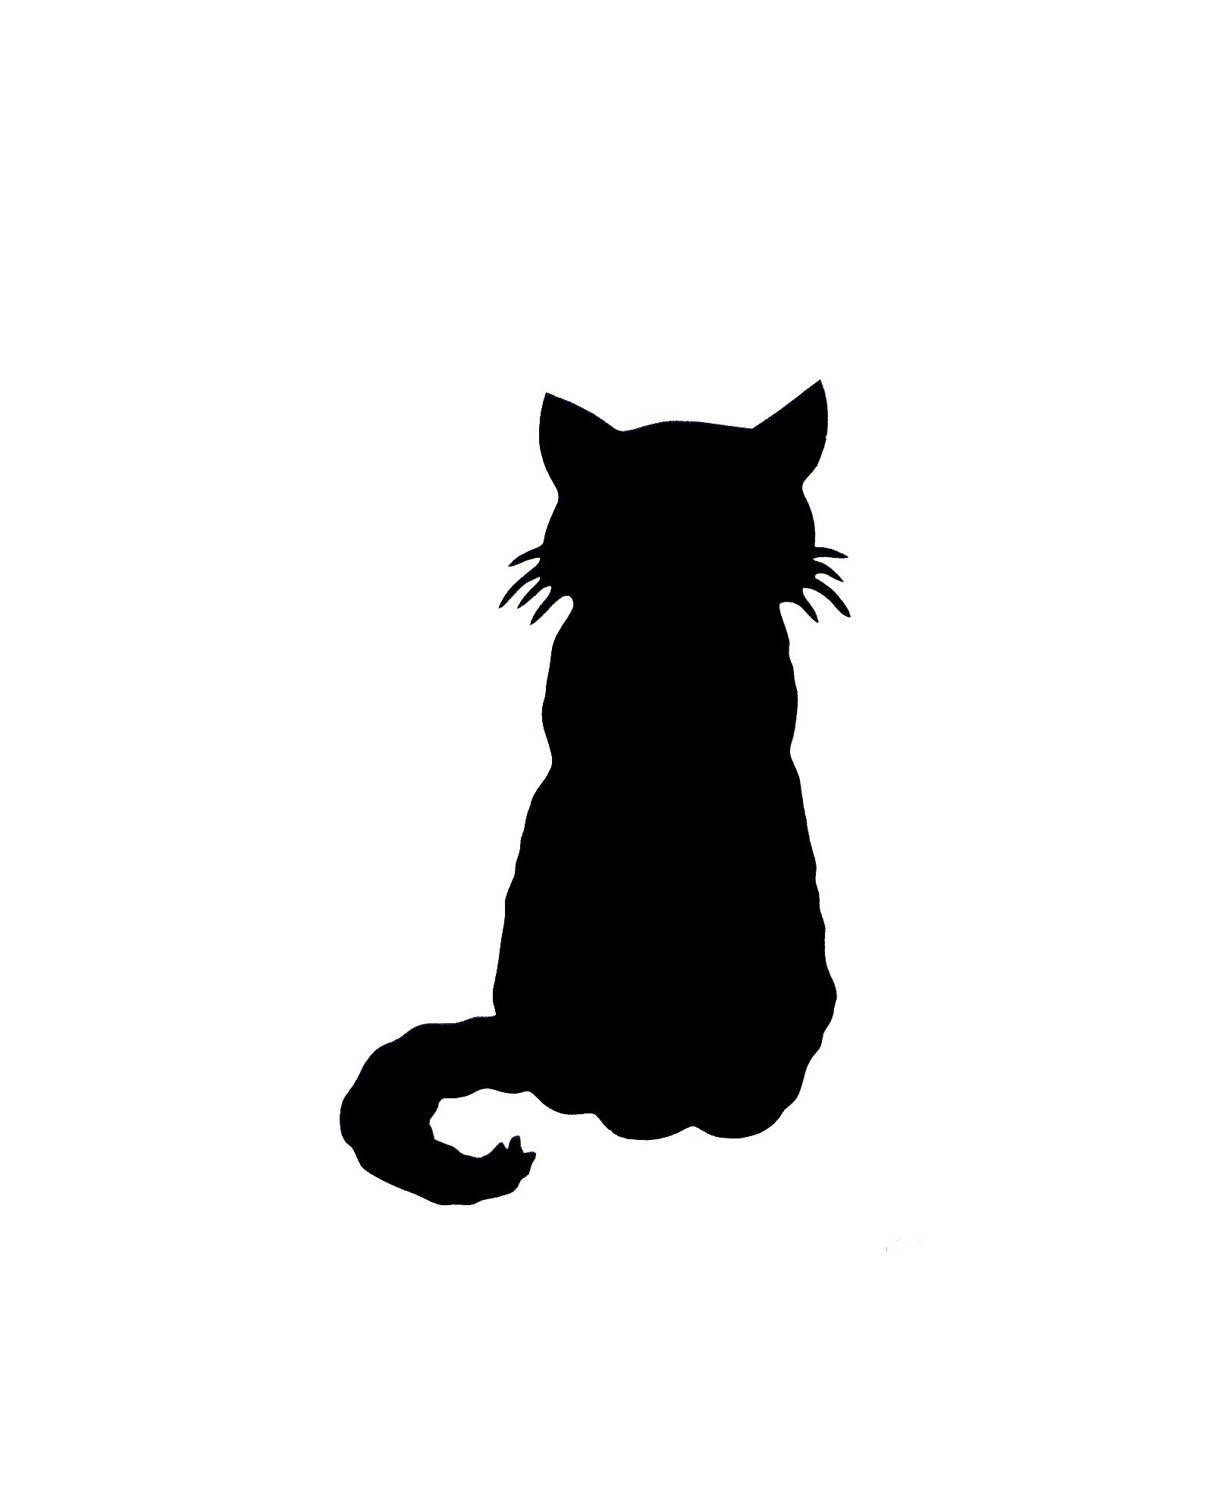 Sitting Cat Silhouette Images  Pictures - Becuo